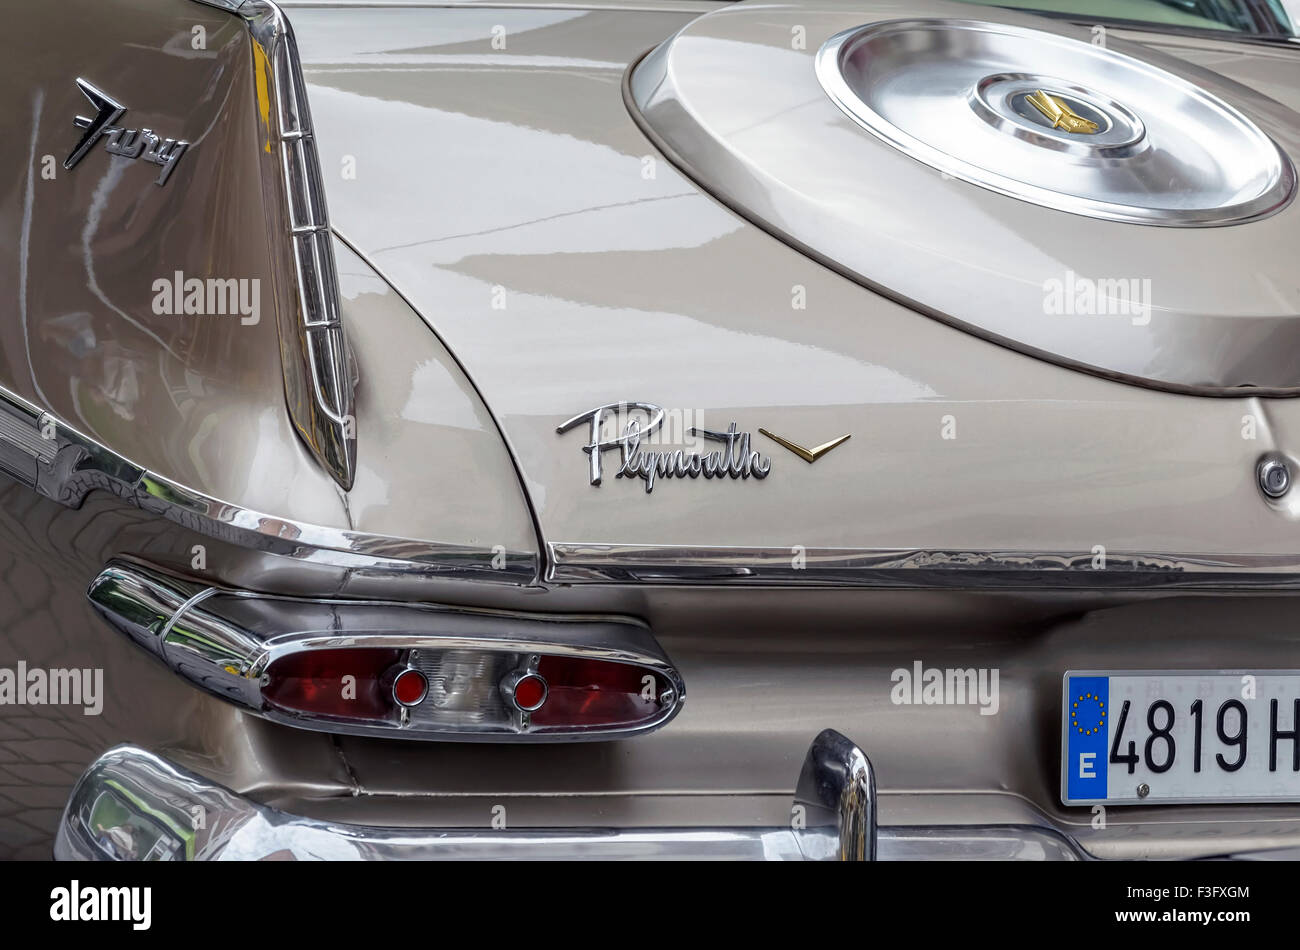 Meeting of classic american cars. Partial rear view of champagne color car, Plymouth Fury of 1959. Stock Photo